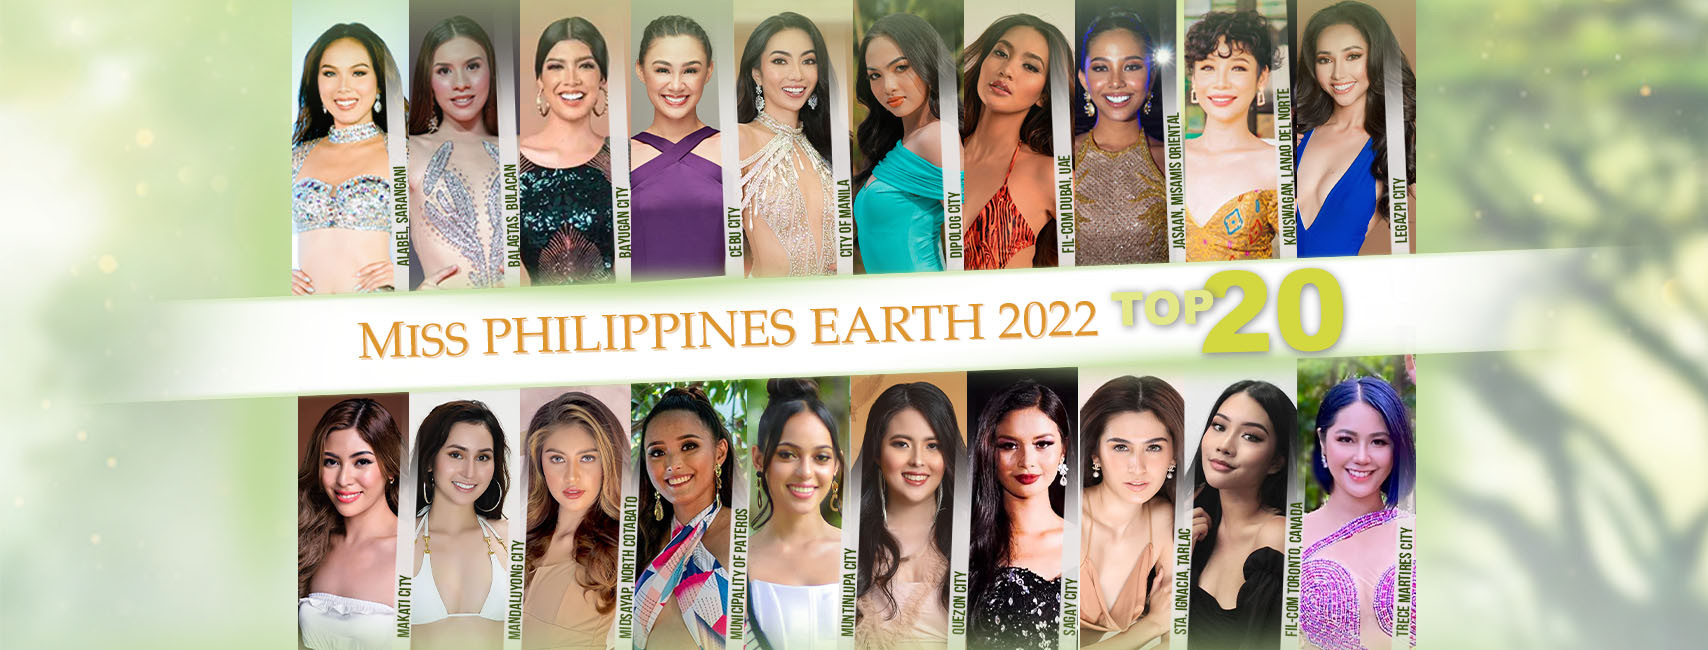 top 20 de miss earth philippines 2022. final: 6 agosto. W4HlUl